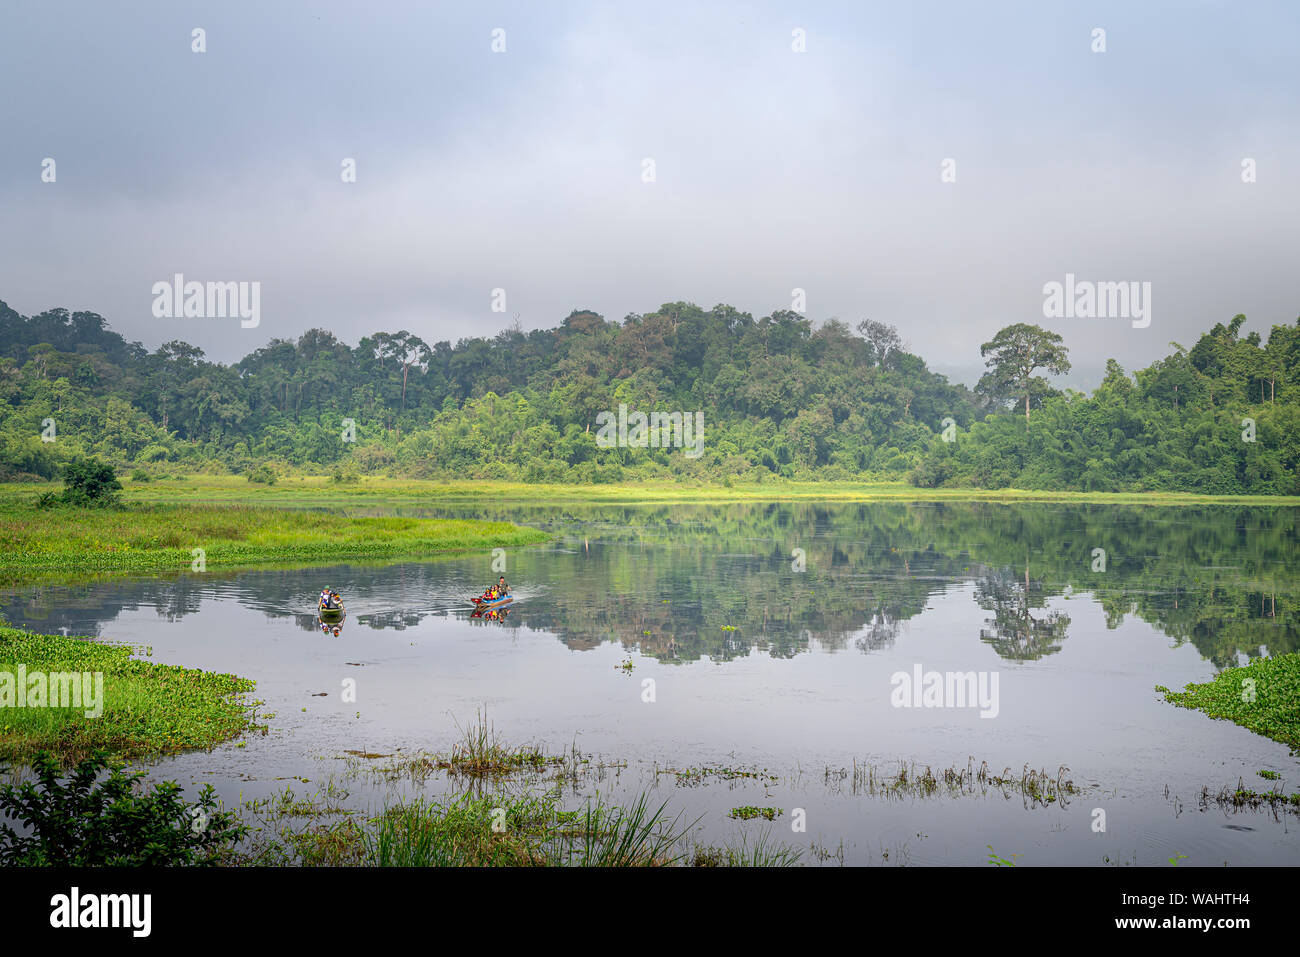 Dong Nai, Vietnam - June 4th, 2017: Panorama Of Ecotourism Area With A  Bridge Over The Peninsula In Large Lake With Many Small Islands Stock  Photo, Picture and Royalty Free Image. Image 80455504.